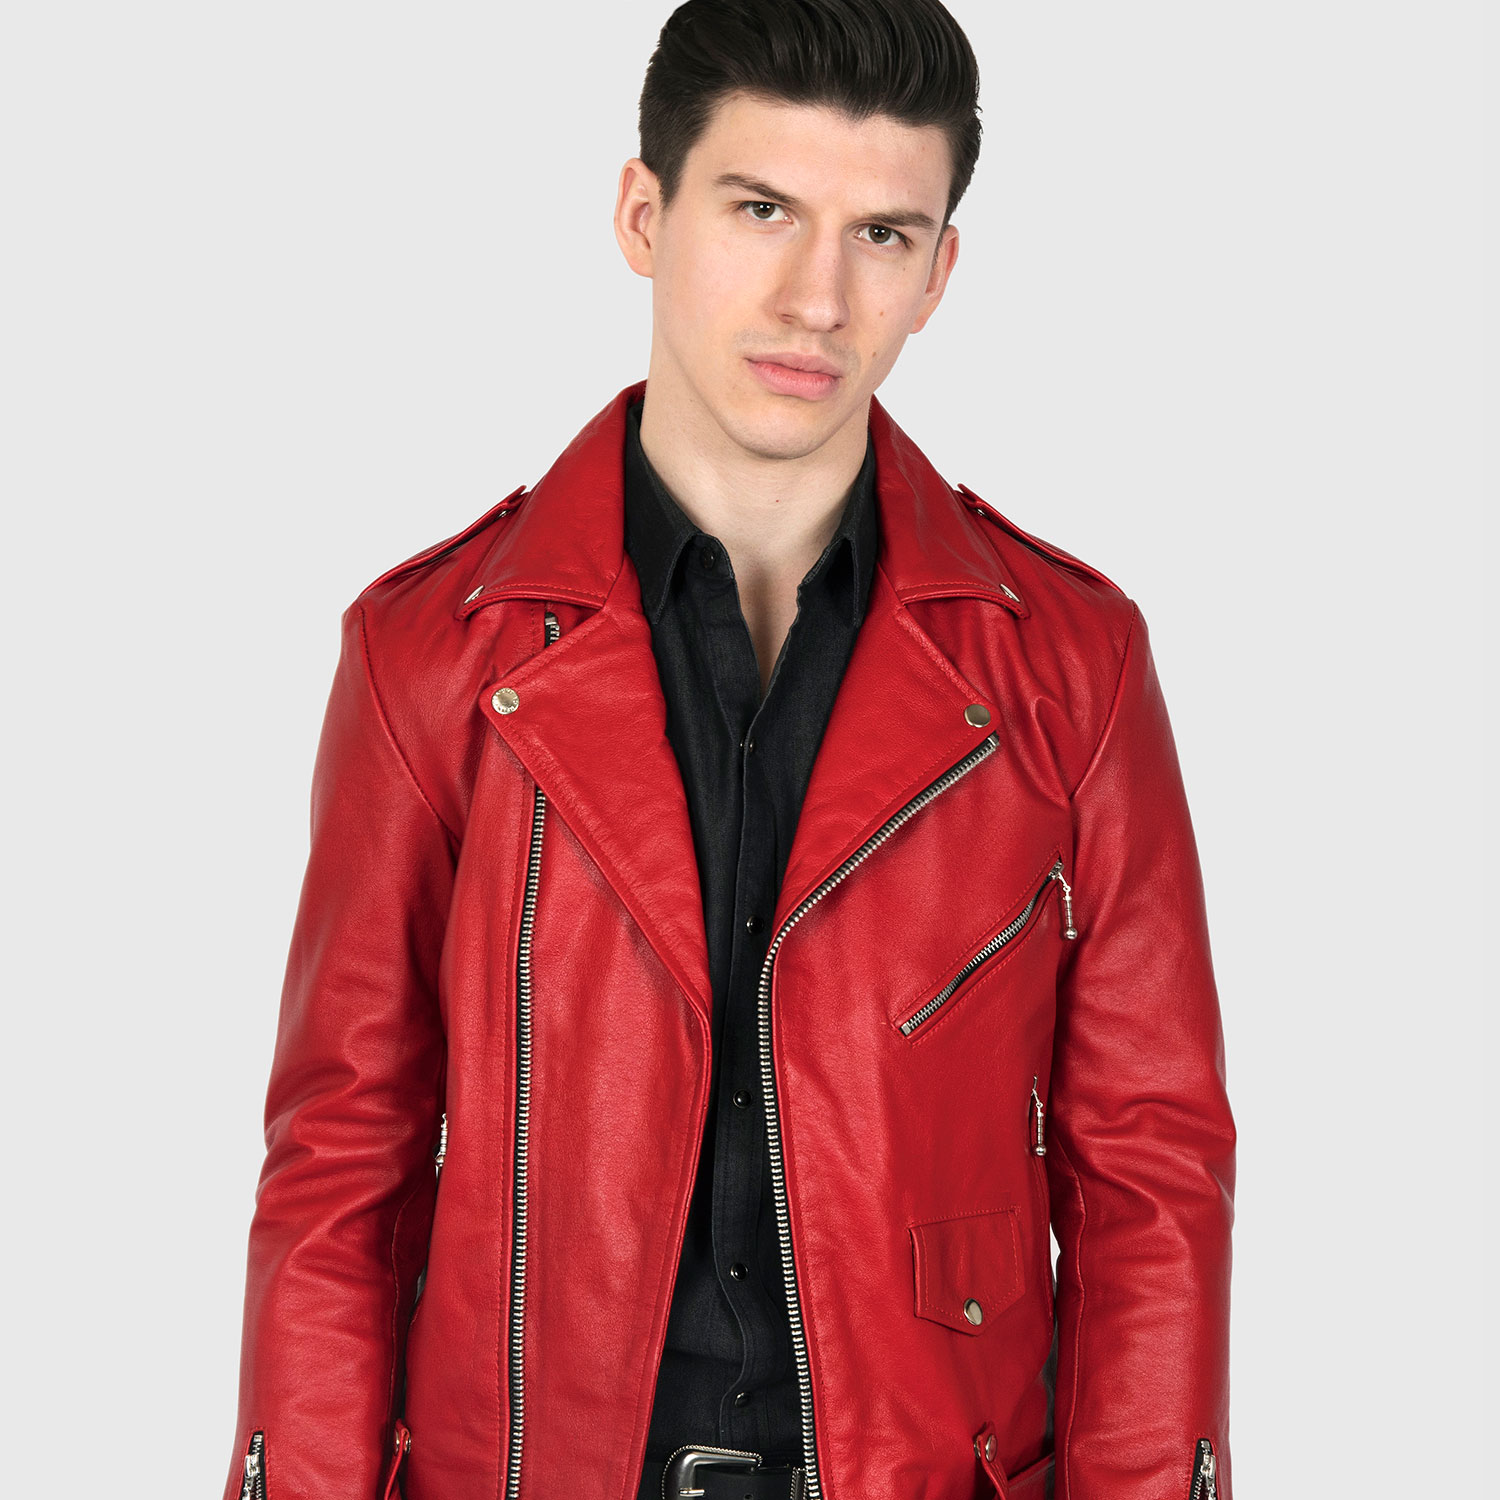 Slip sko Indgang kalorie Commando - Blood Red Leather Jacket | Straight To Hell Apparel